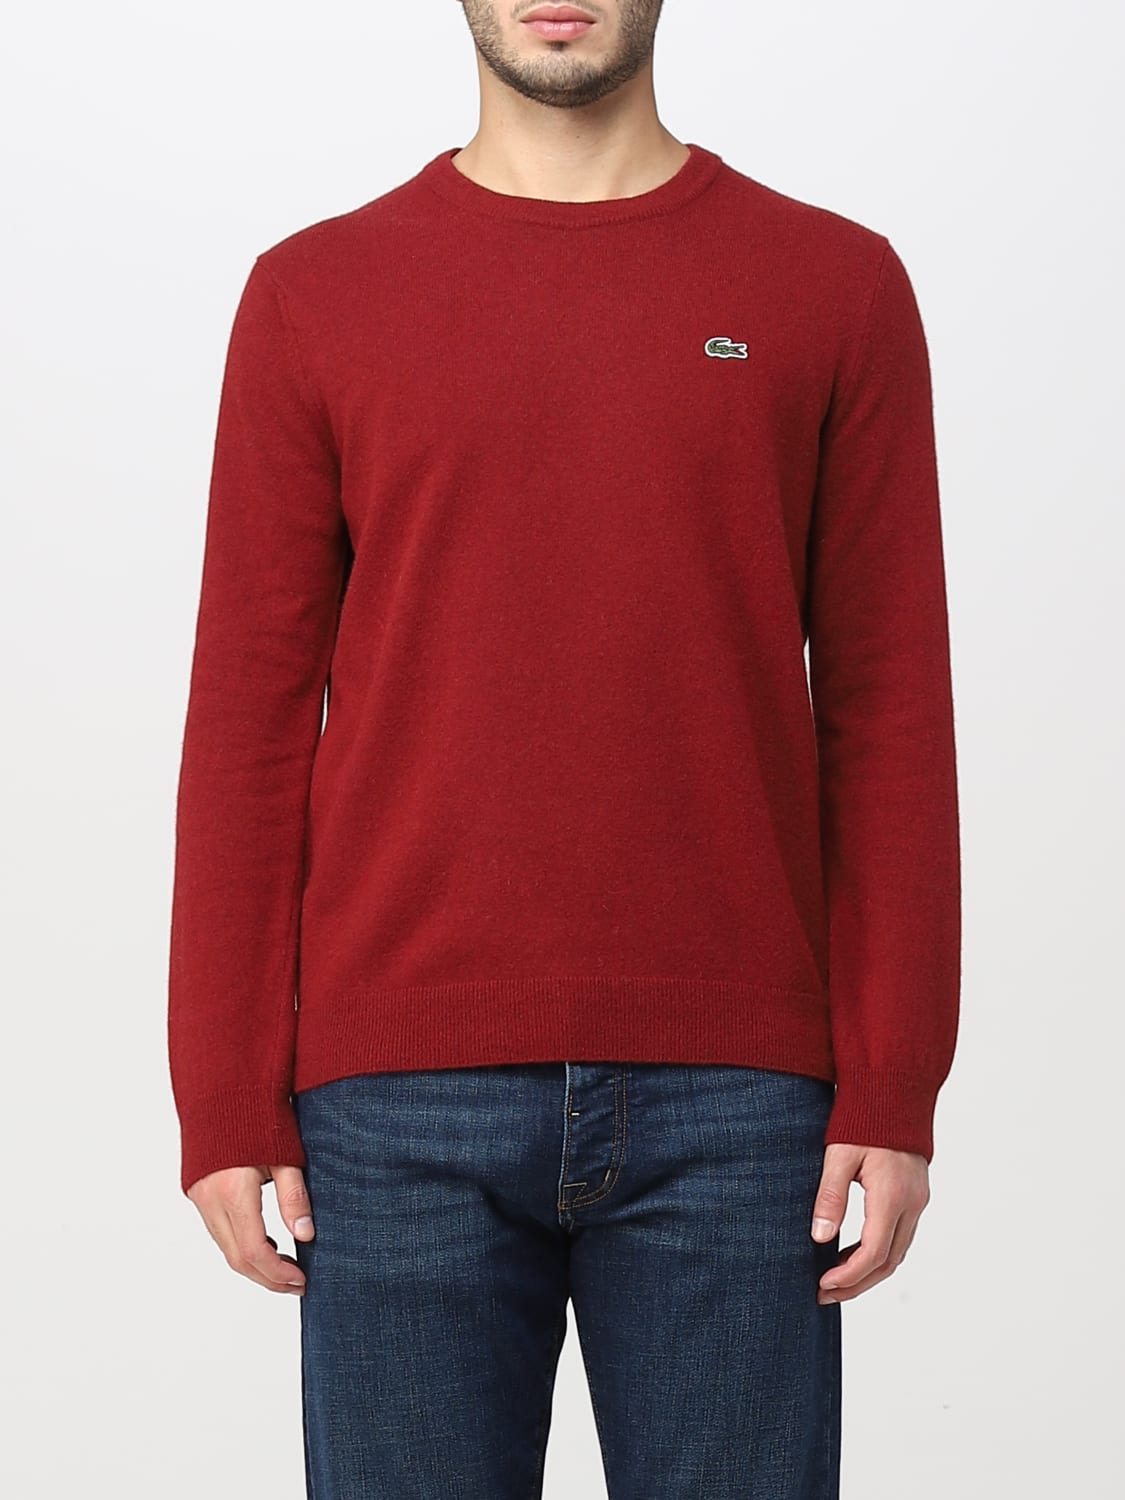 Dios Confundir bala Lacoste Outlet: sweater for man - Red | Lacoste sweater AH3449 online on  GIGLIO.COM